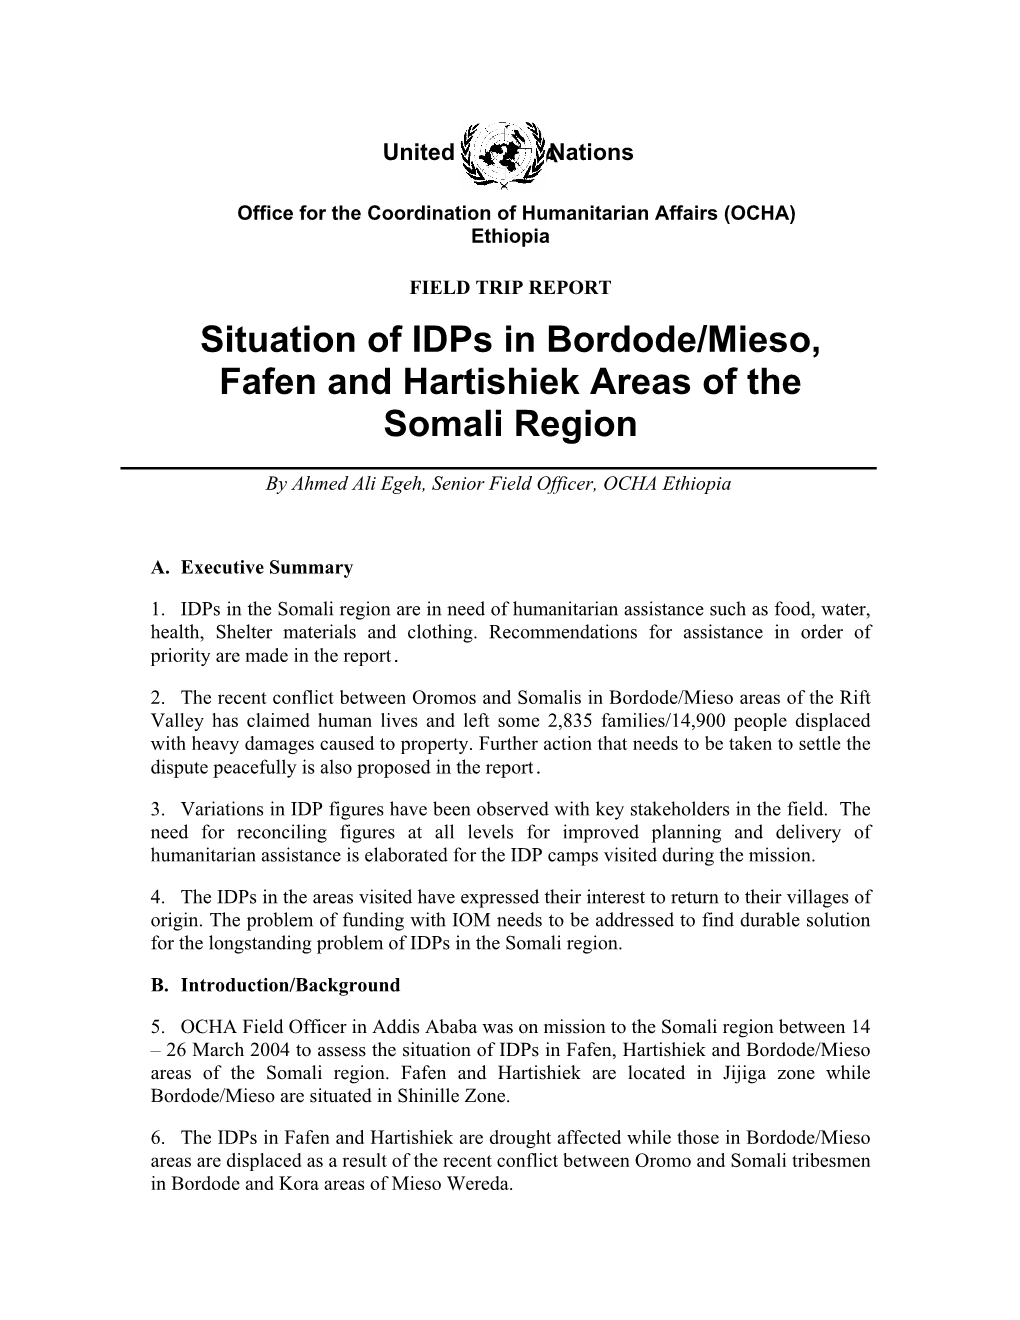 Situation of Idps in Bordode/Mieso, Fafen and Hartishiek Areas of the Somali Region